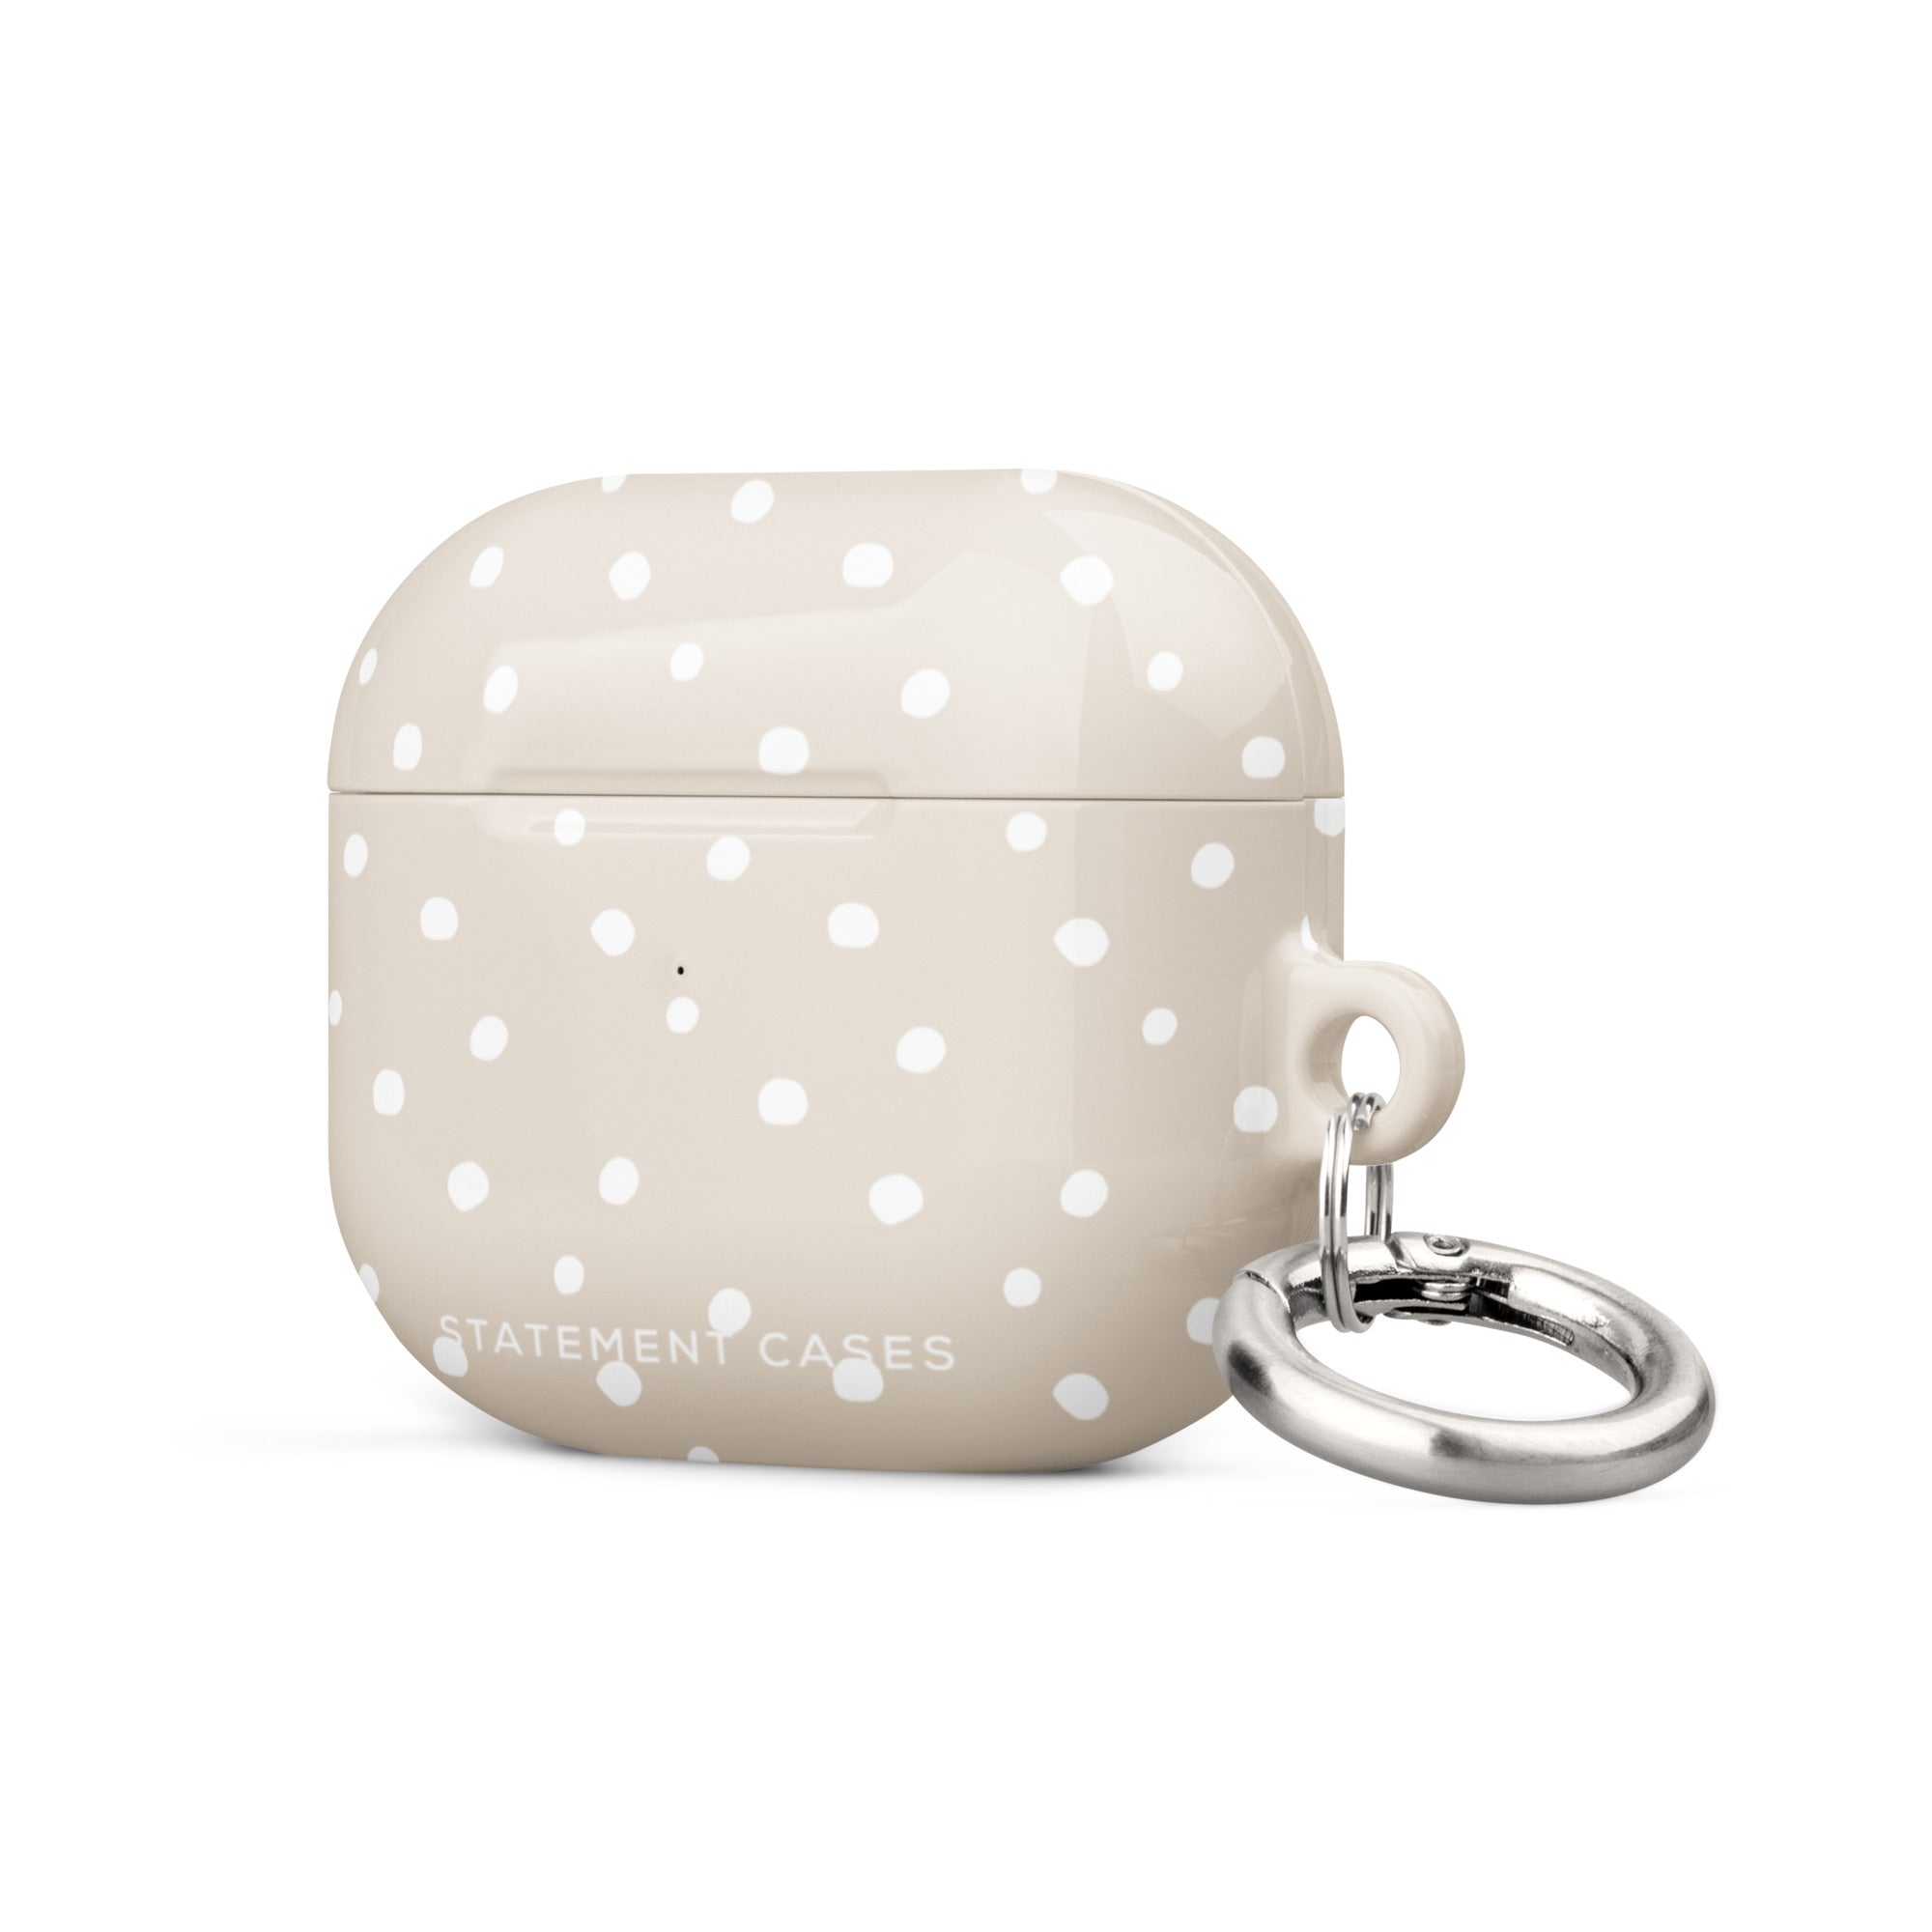 A Classic Nude for AirPods Gen 3 with white polka dots and a metal carabiner attached to the side. Crafted from a premium impact-absorbing material, the case features the text "Statement Cases" written at the bottom.